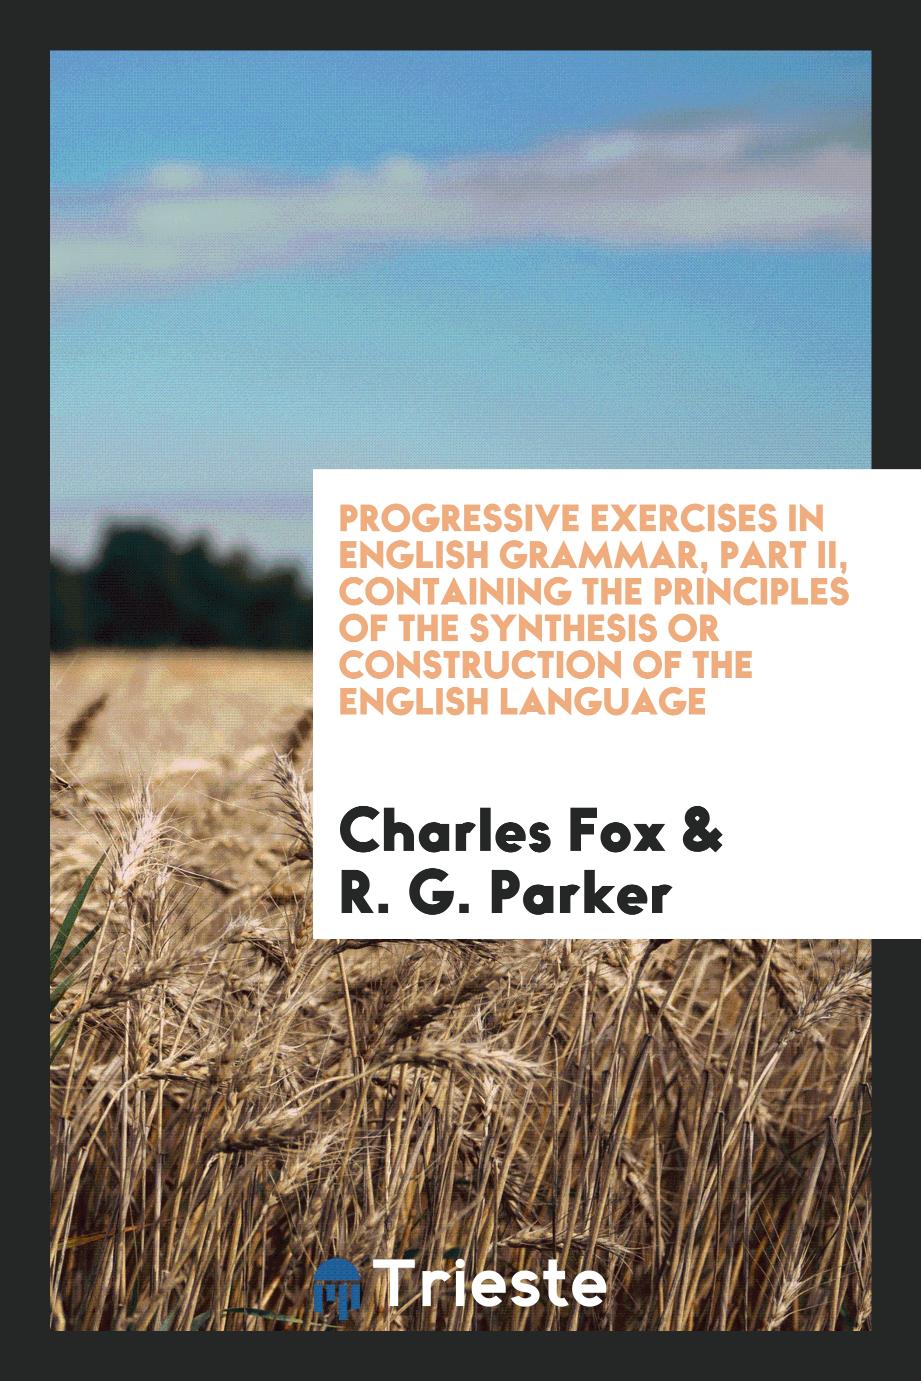 Progressive Exercises in English Grammar, Part II, Containing the principles of the synthesis or construction of the english language